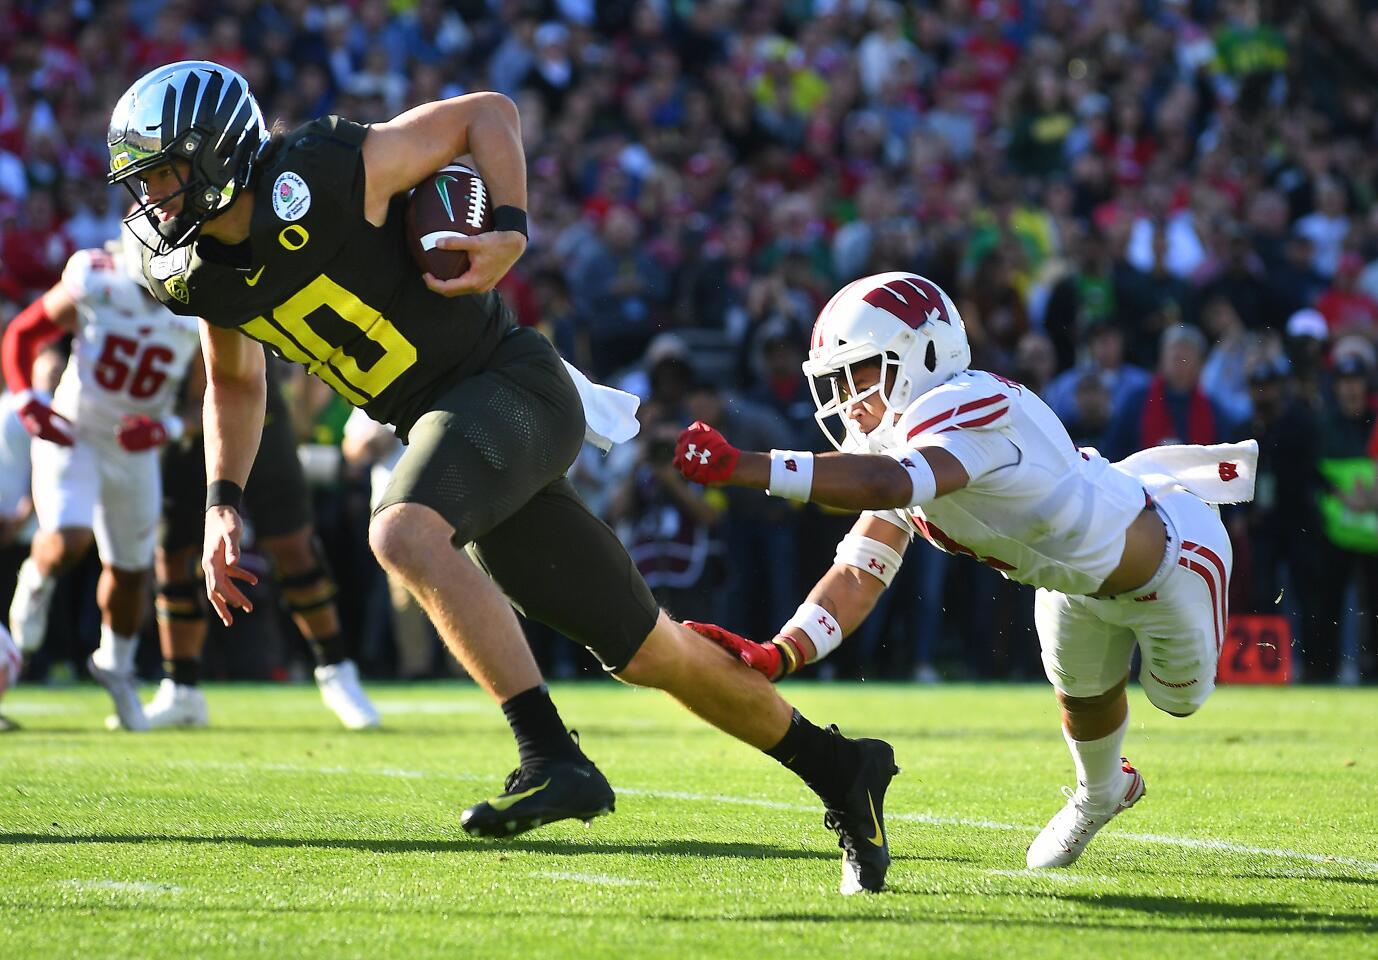 Oregon quarterback Justin Herbert breaks loose from Wisconsin safety Reggie Pearson to score a touchdown in the first quarter.